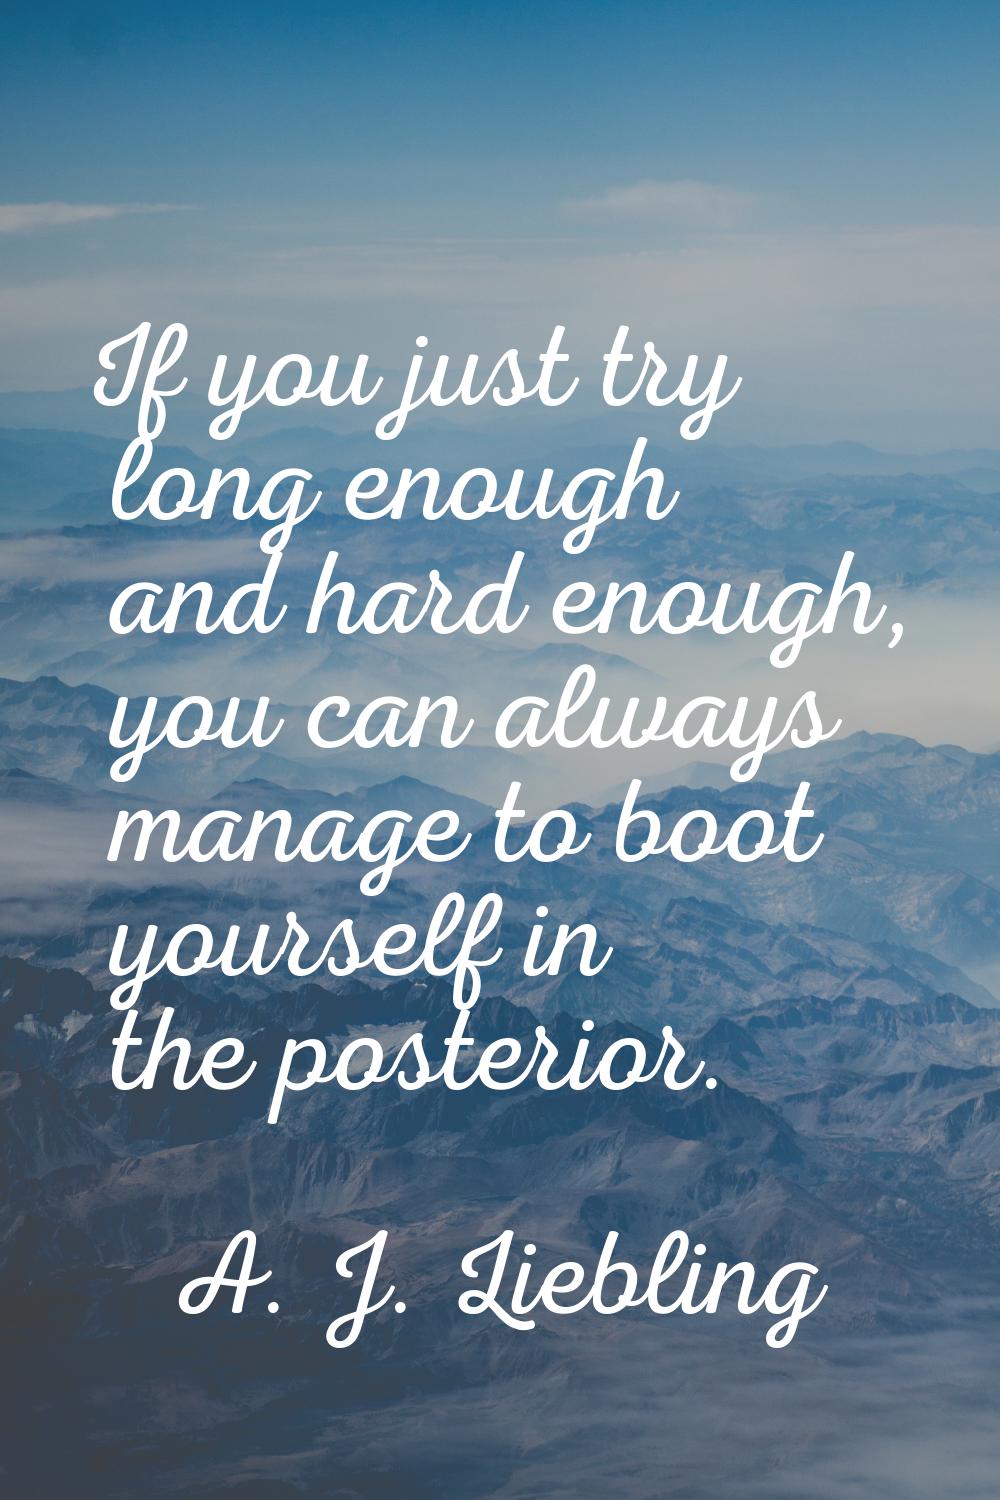 If you just try long enough and hard enough, you can always manage to boot yourself in the posterio